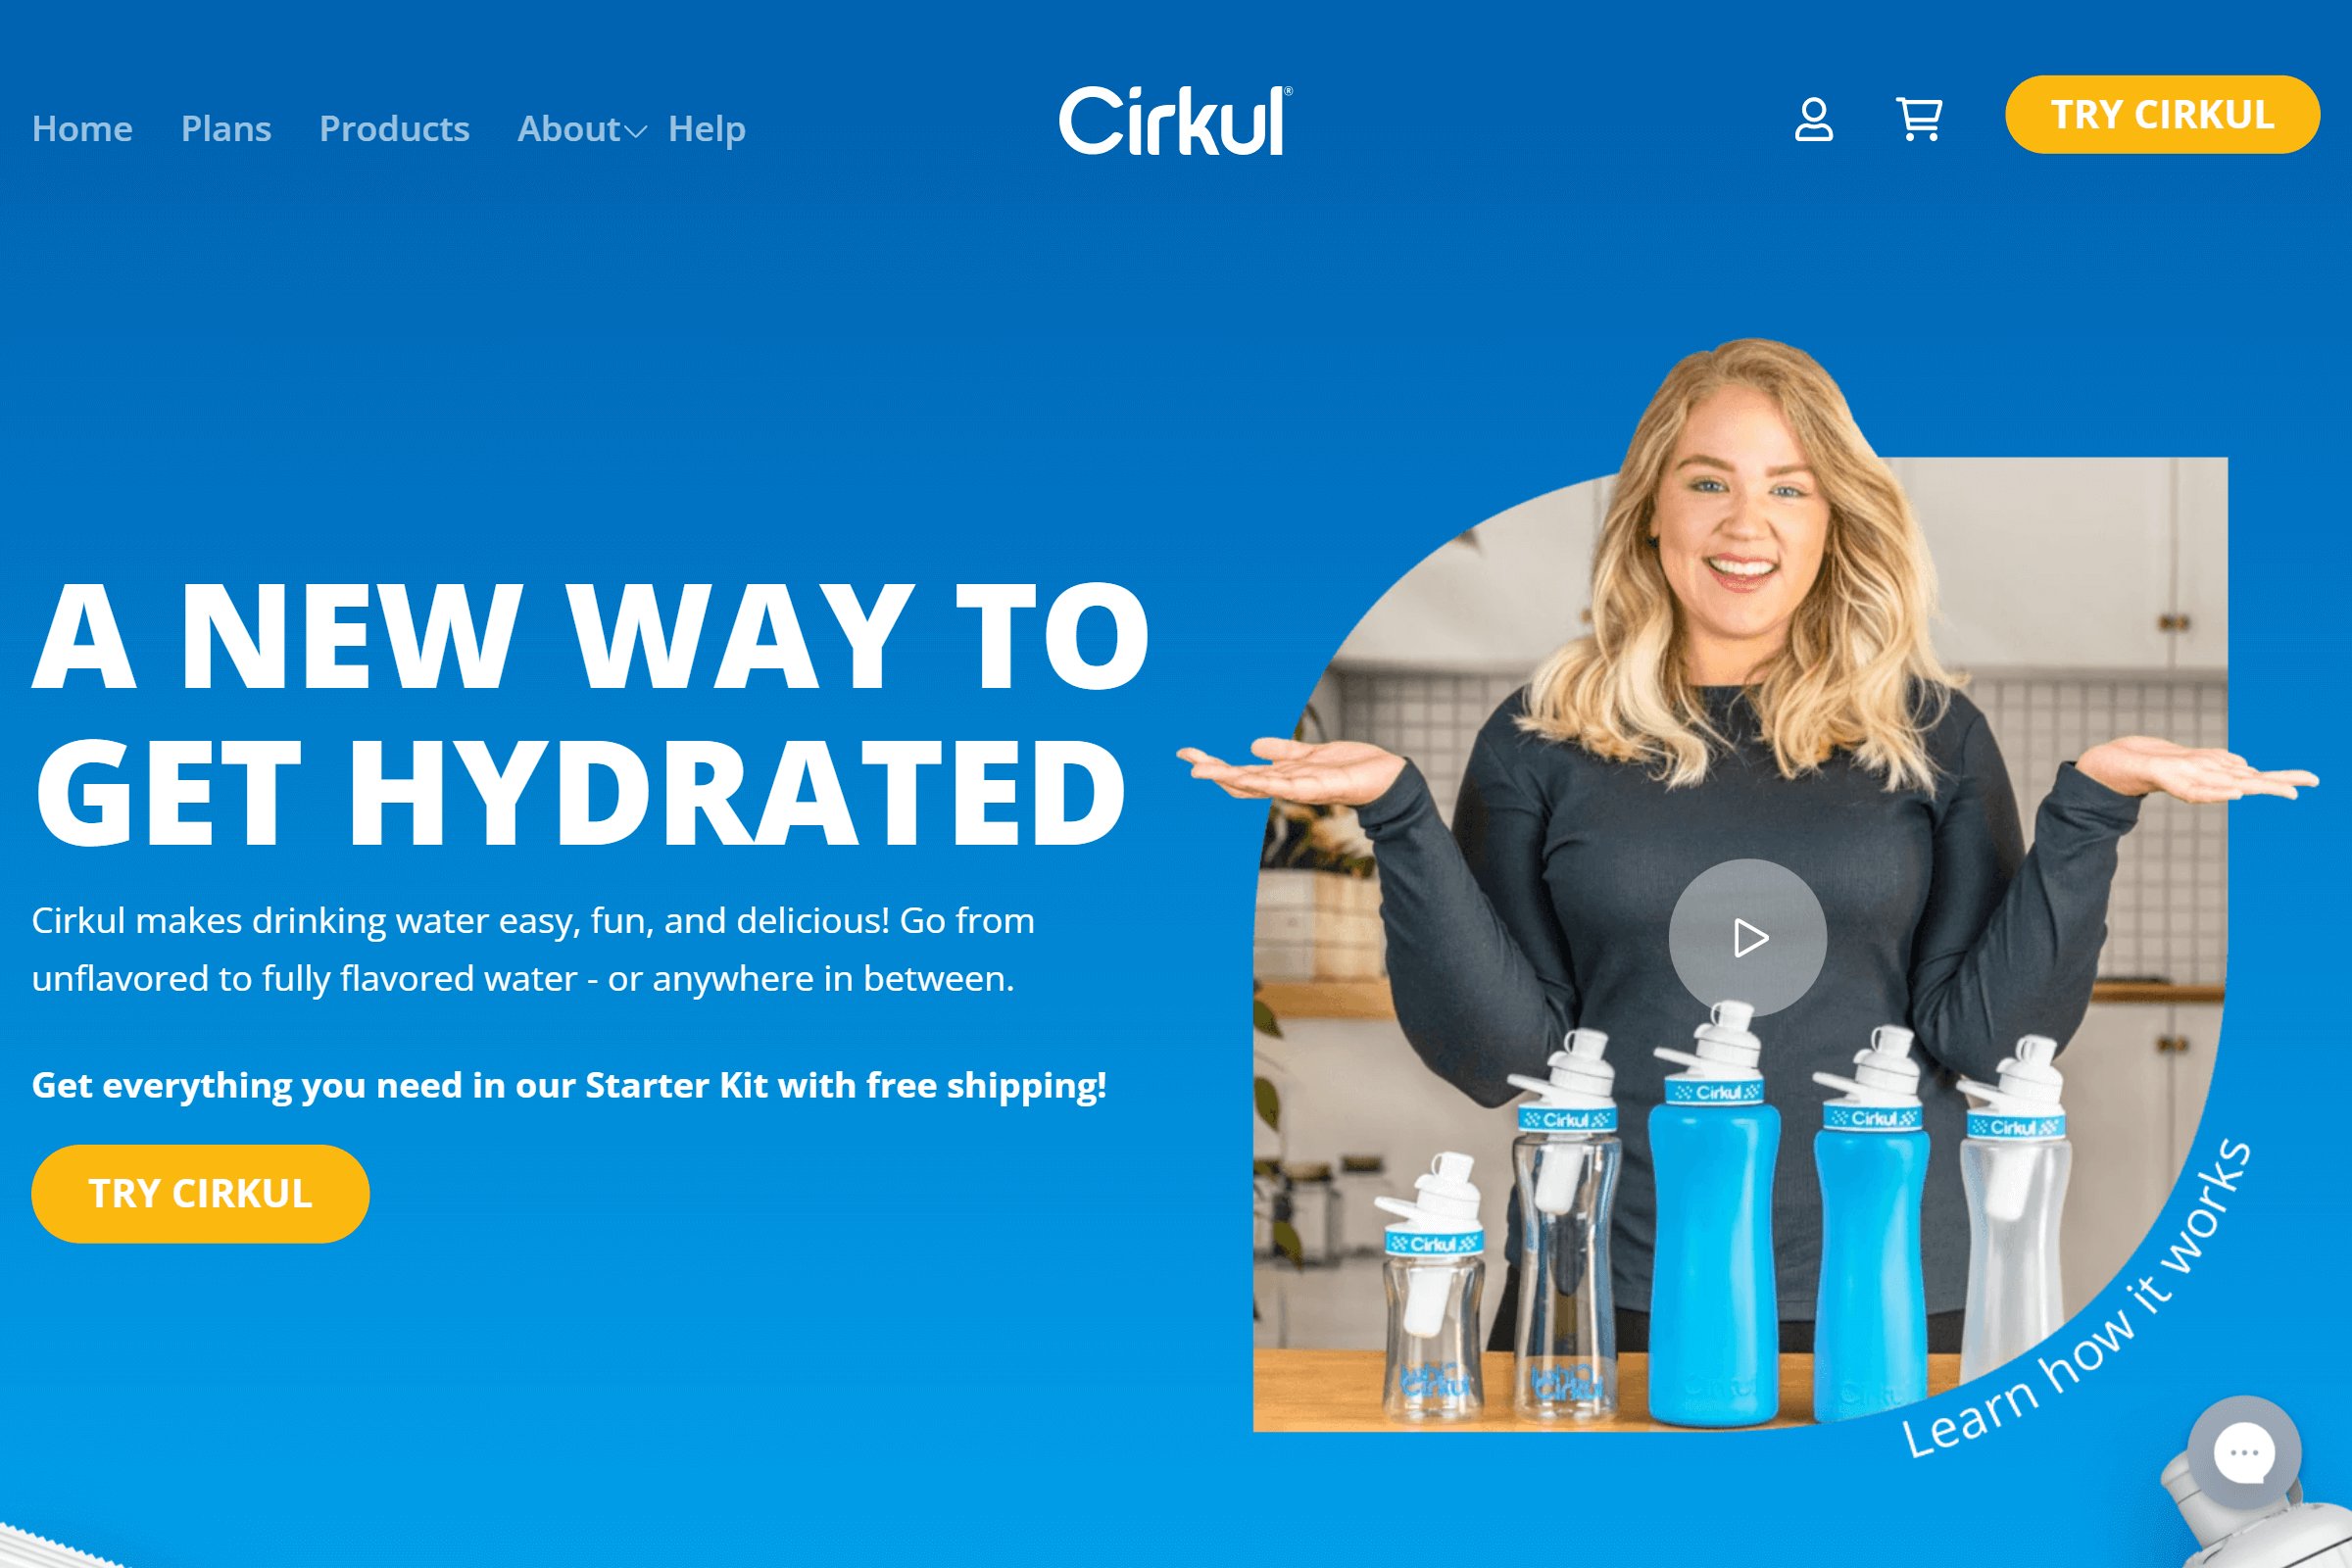 Drink Cirkul on ReadSomeReviews